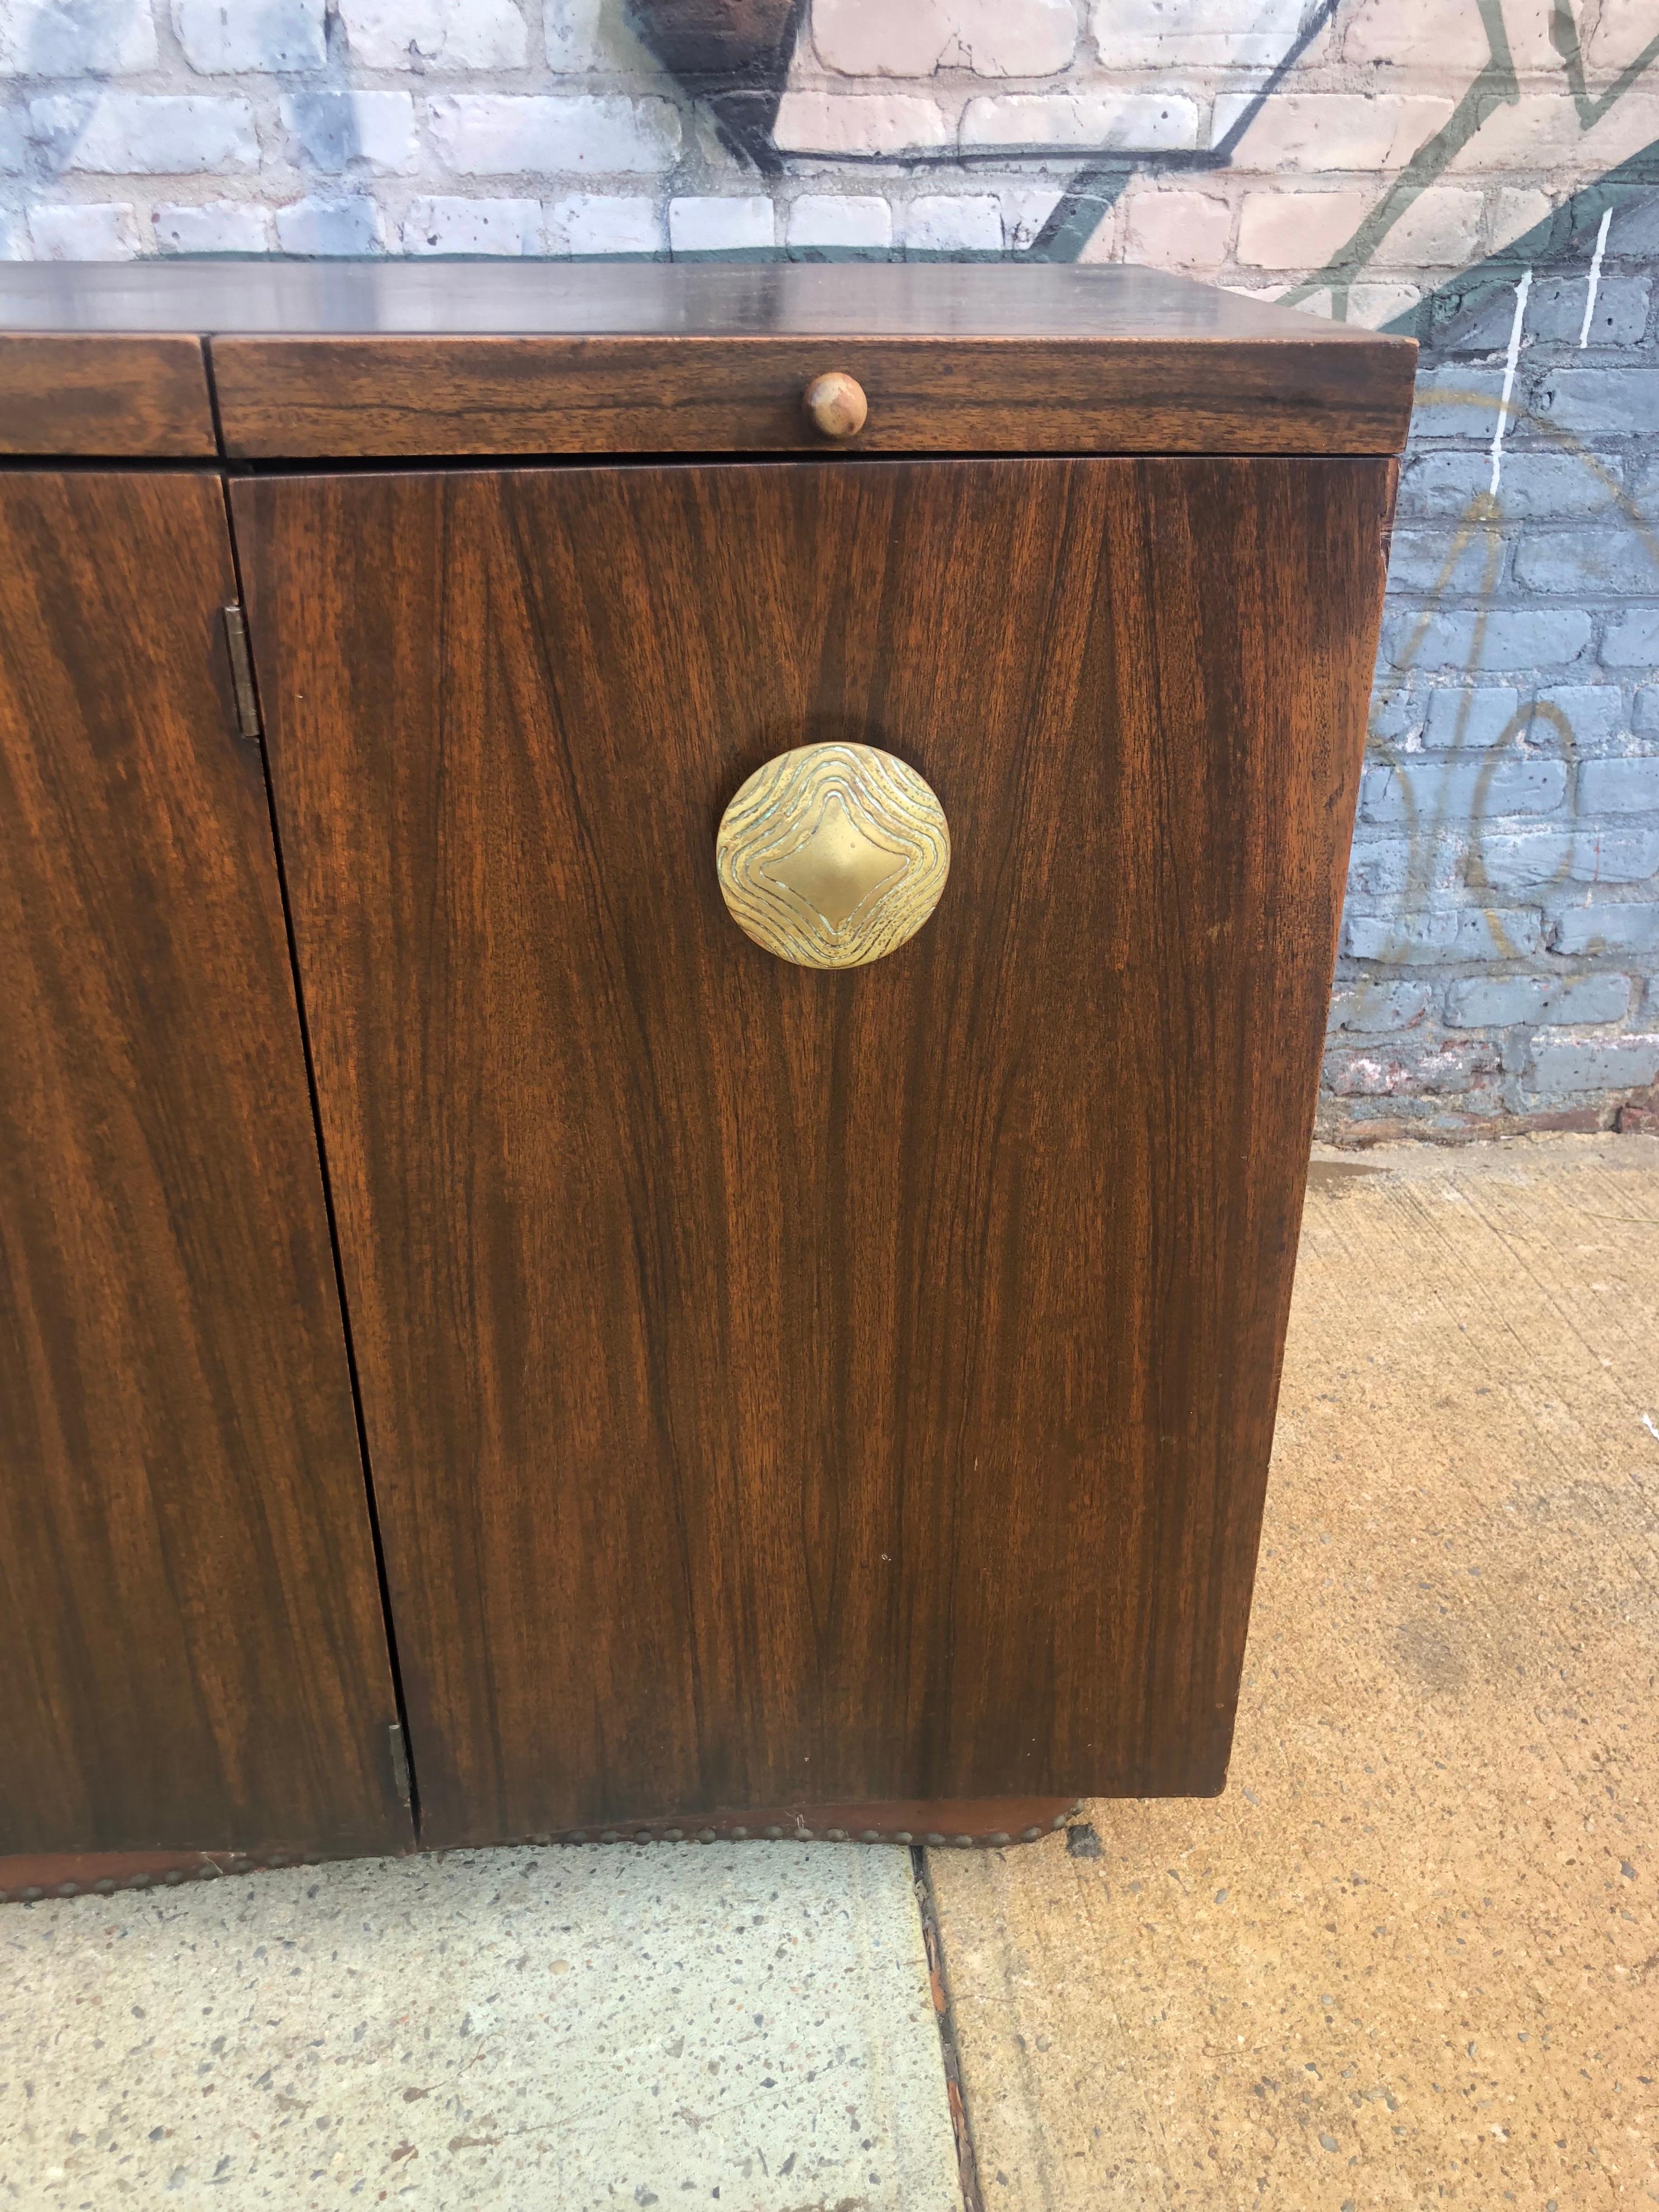 Handsome Gilbert Rohde Paldao series credenza for Herman Miller, circa 1940s Art Deco period piece featuring original cast brass pulls. Doors and drawers function. Cabinet rests on studded plinth base. A statement piece for the discerning collector.